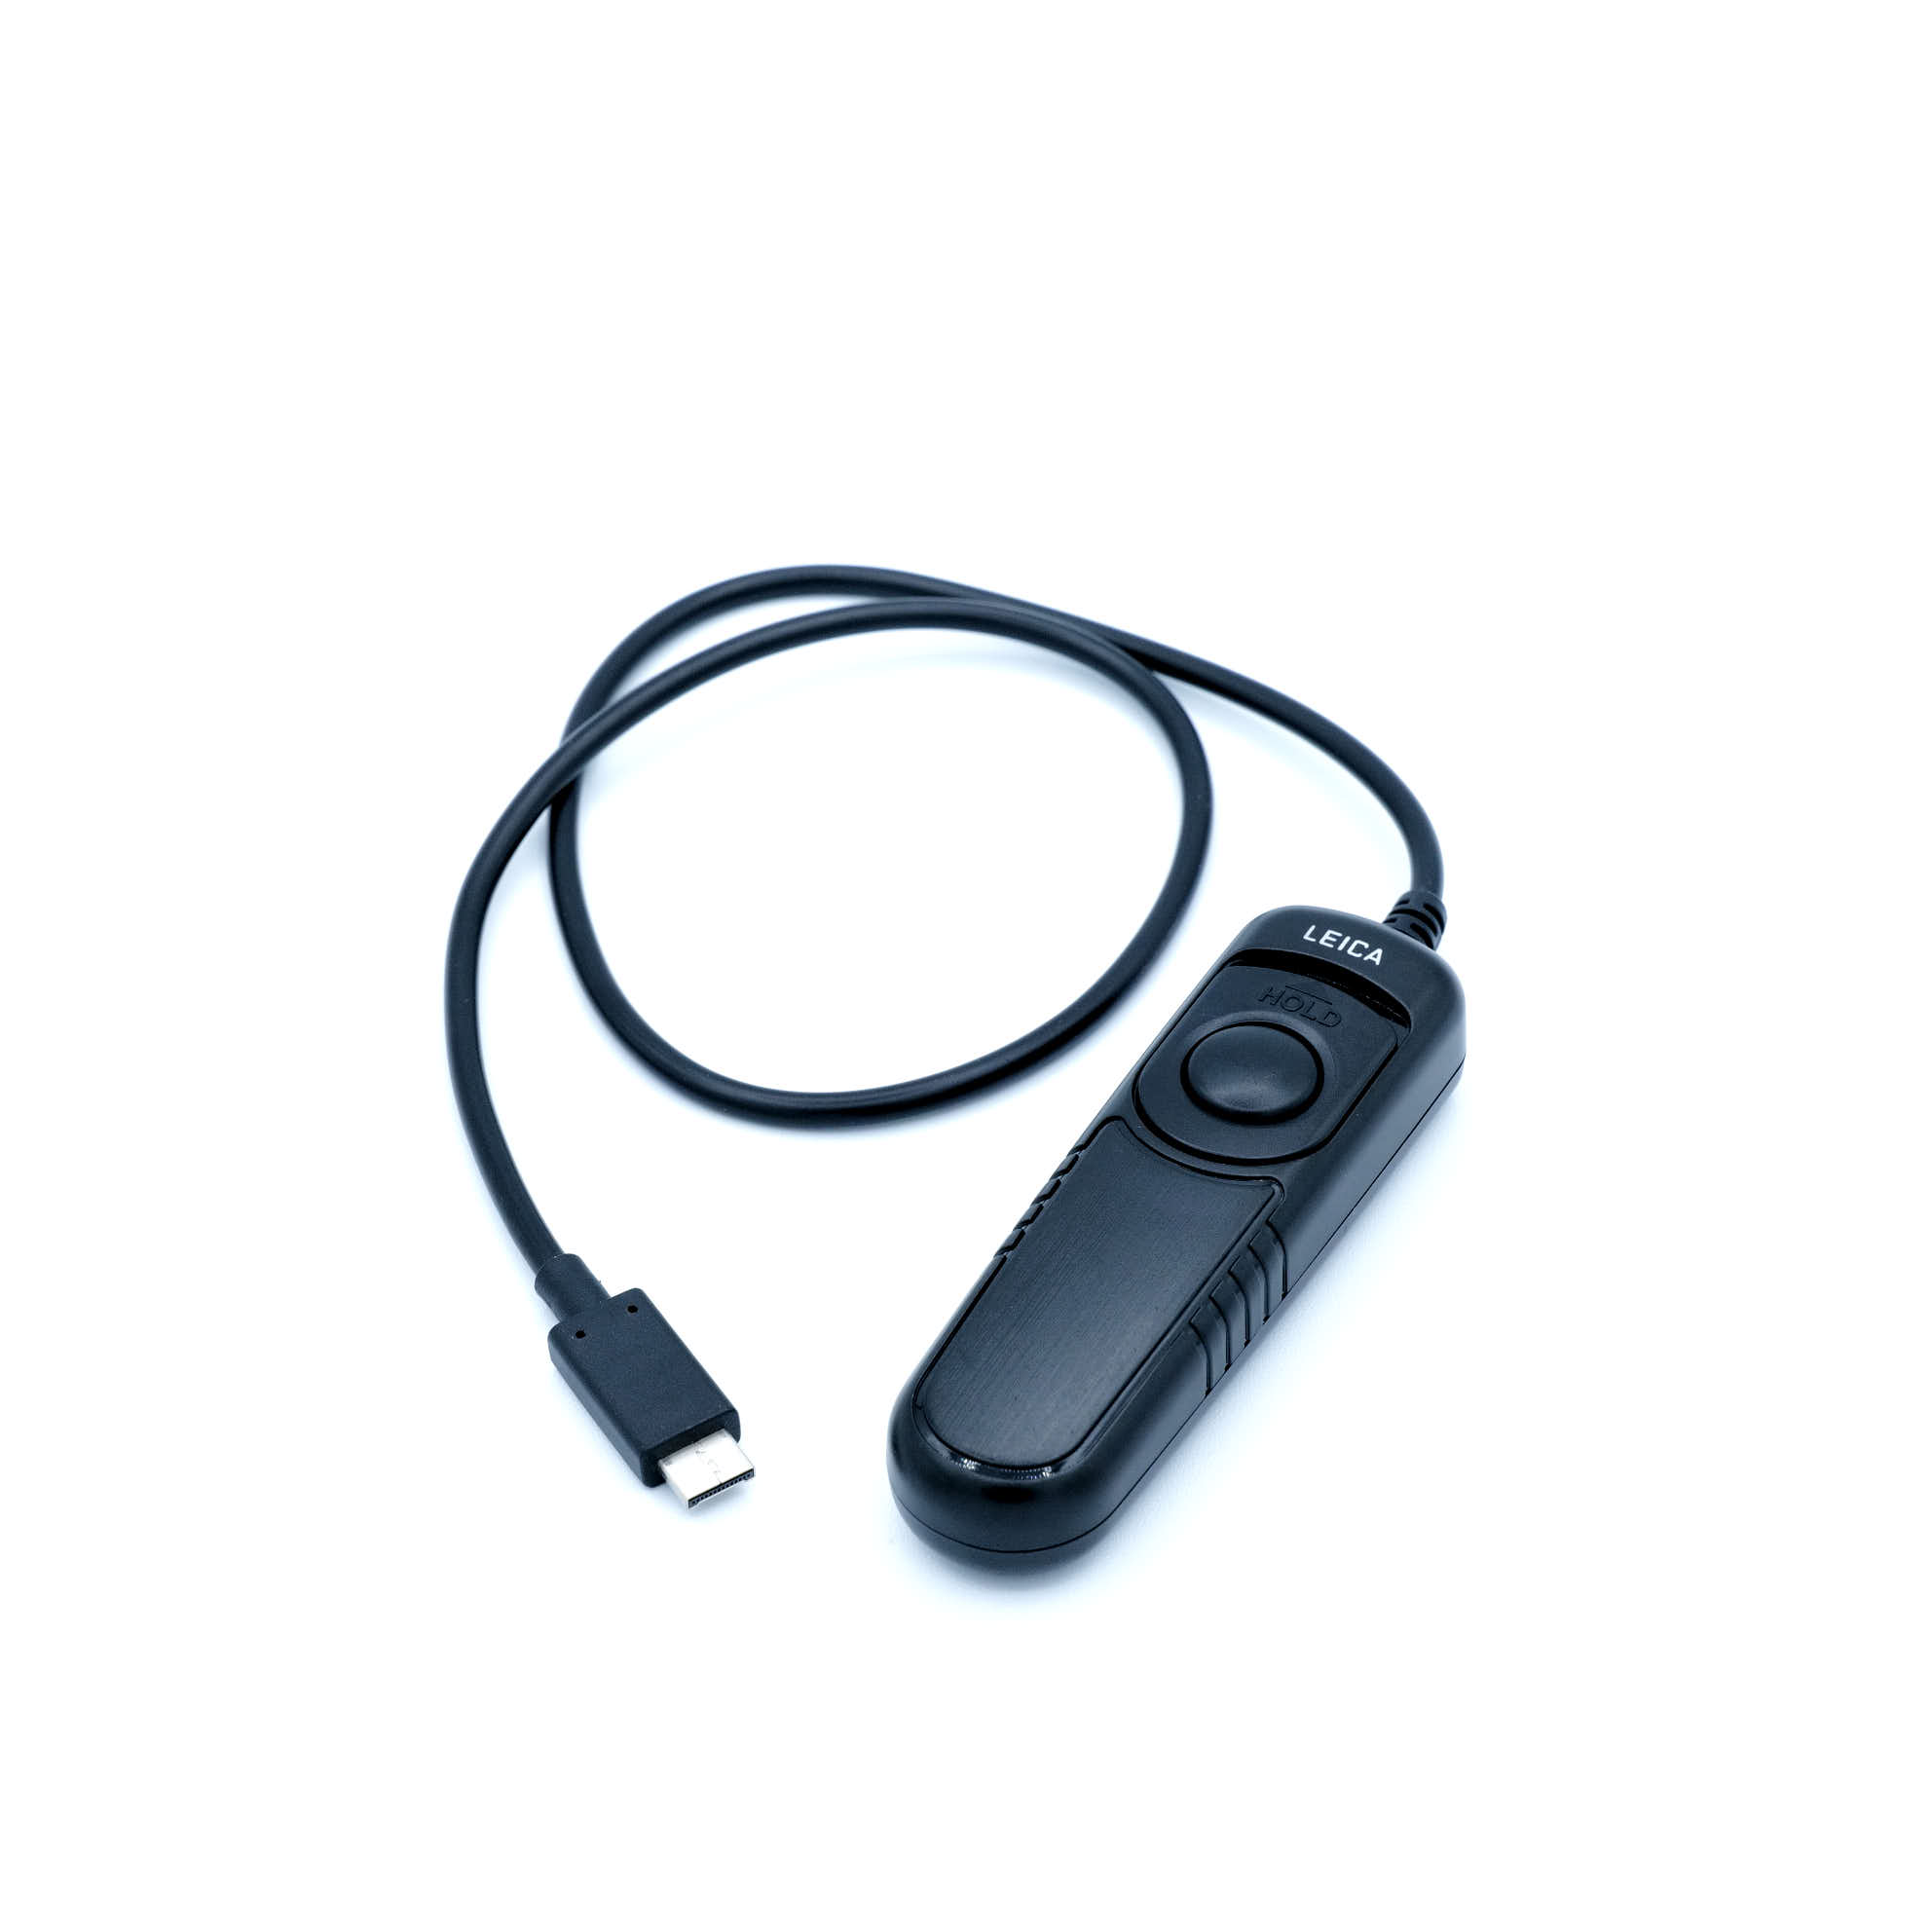 Leica Remote Release Cable RC-SCL4 for Leica SL Typ 601